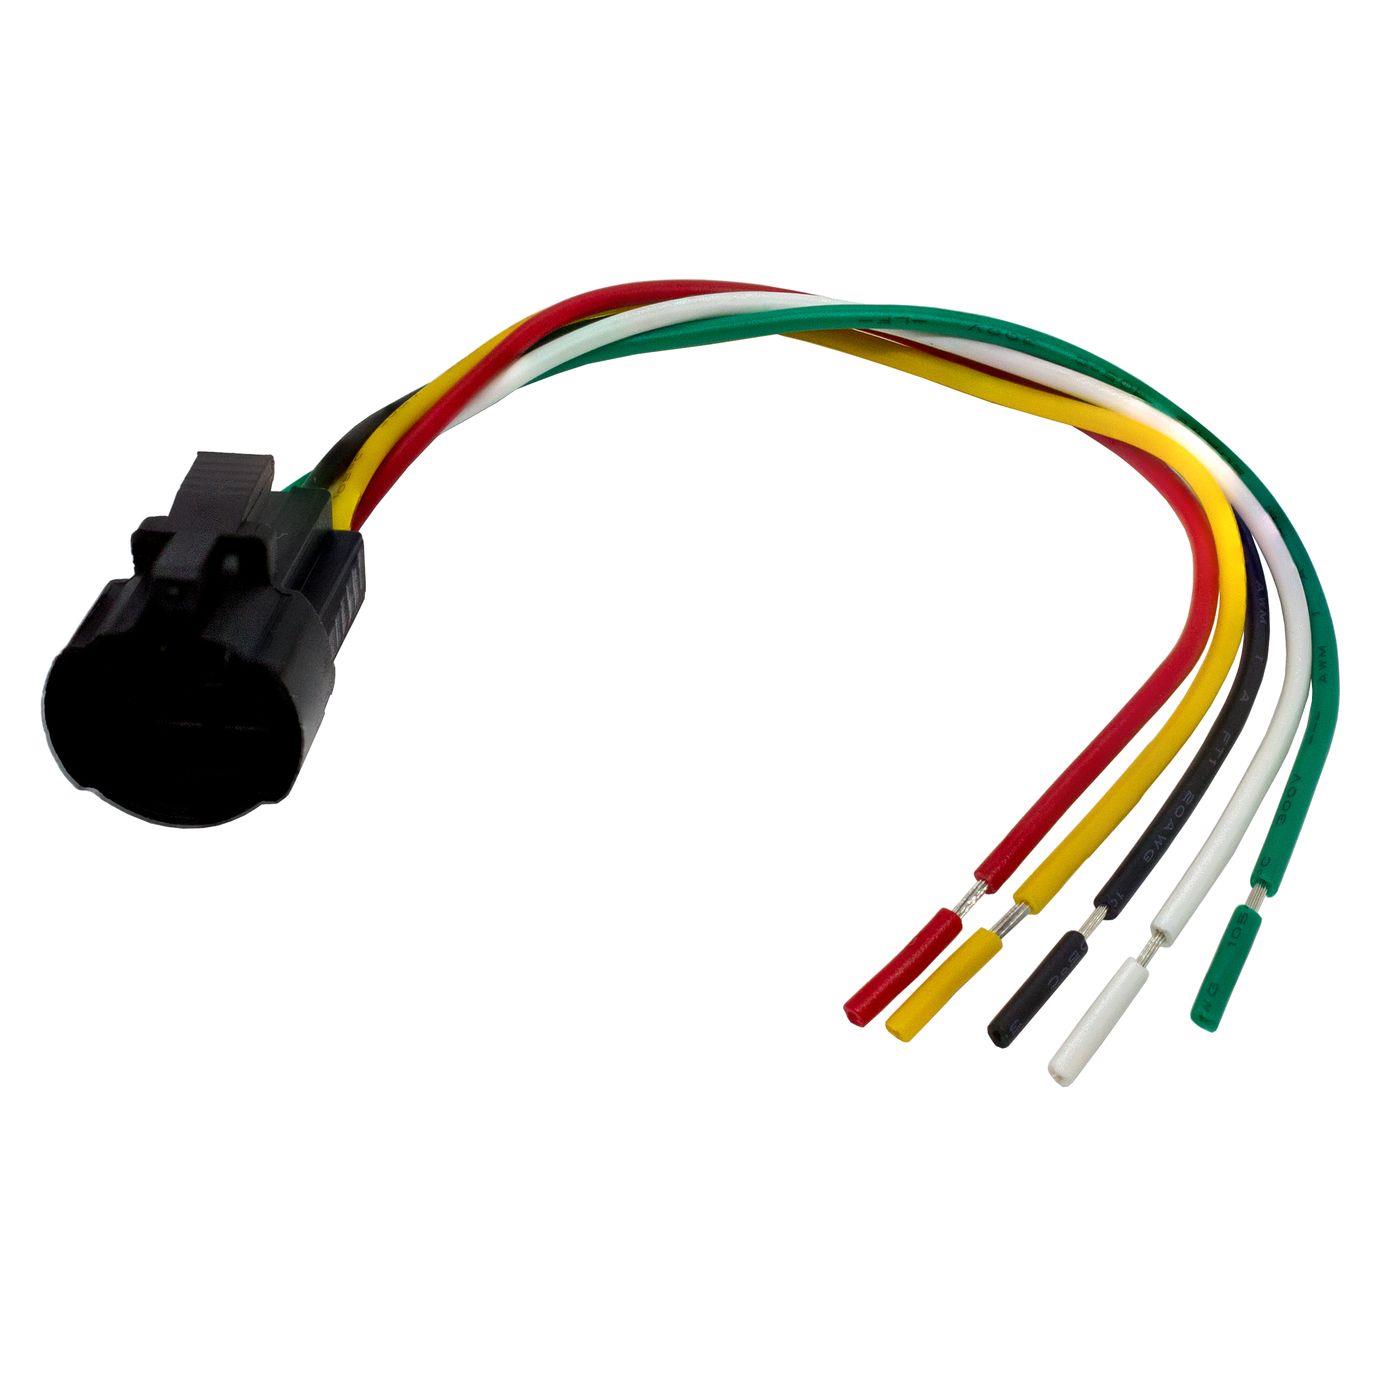 Connectors for 19mm Push button Switch 5x 0,5mm² Cable length: 140mm